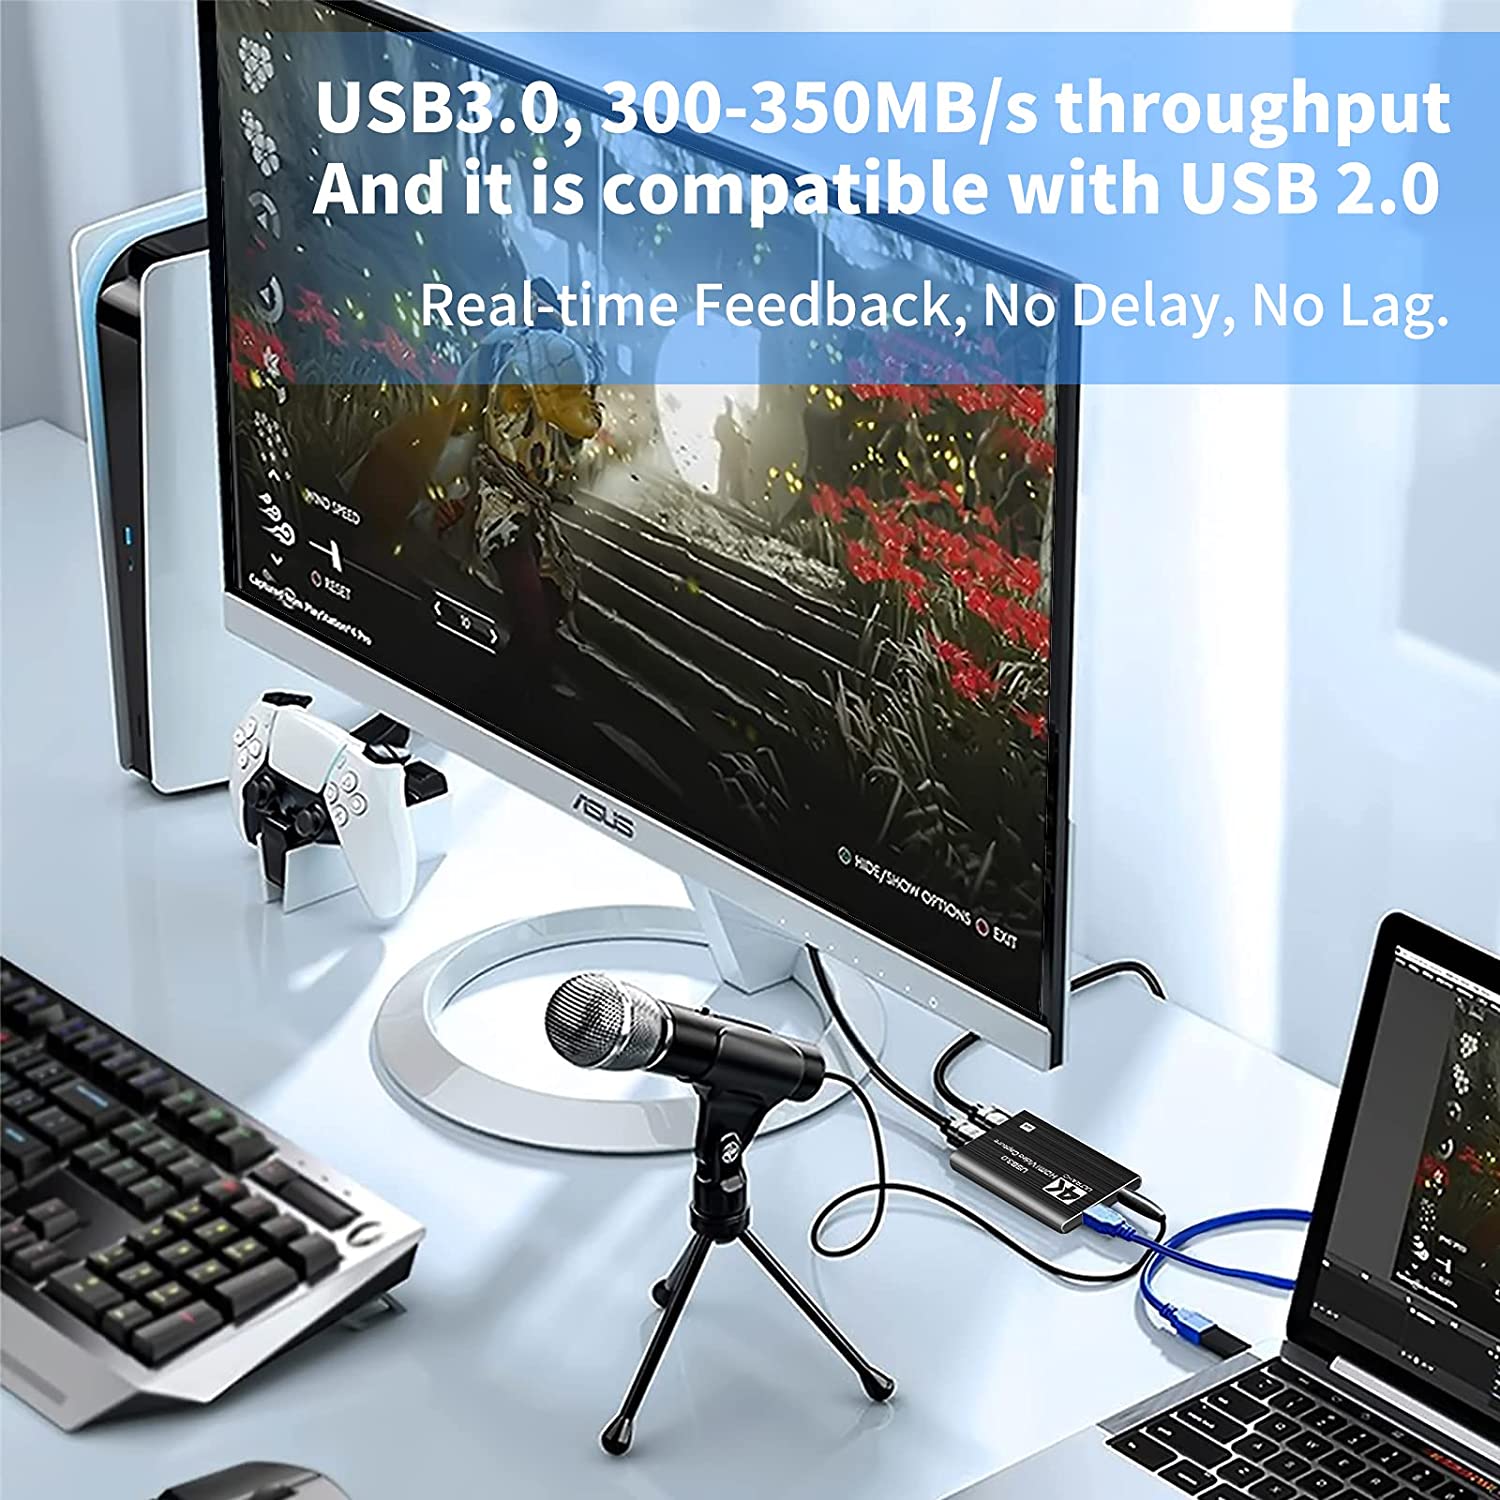 Usb3.0 1080p 60fps Hdmi Game Video Capture Card